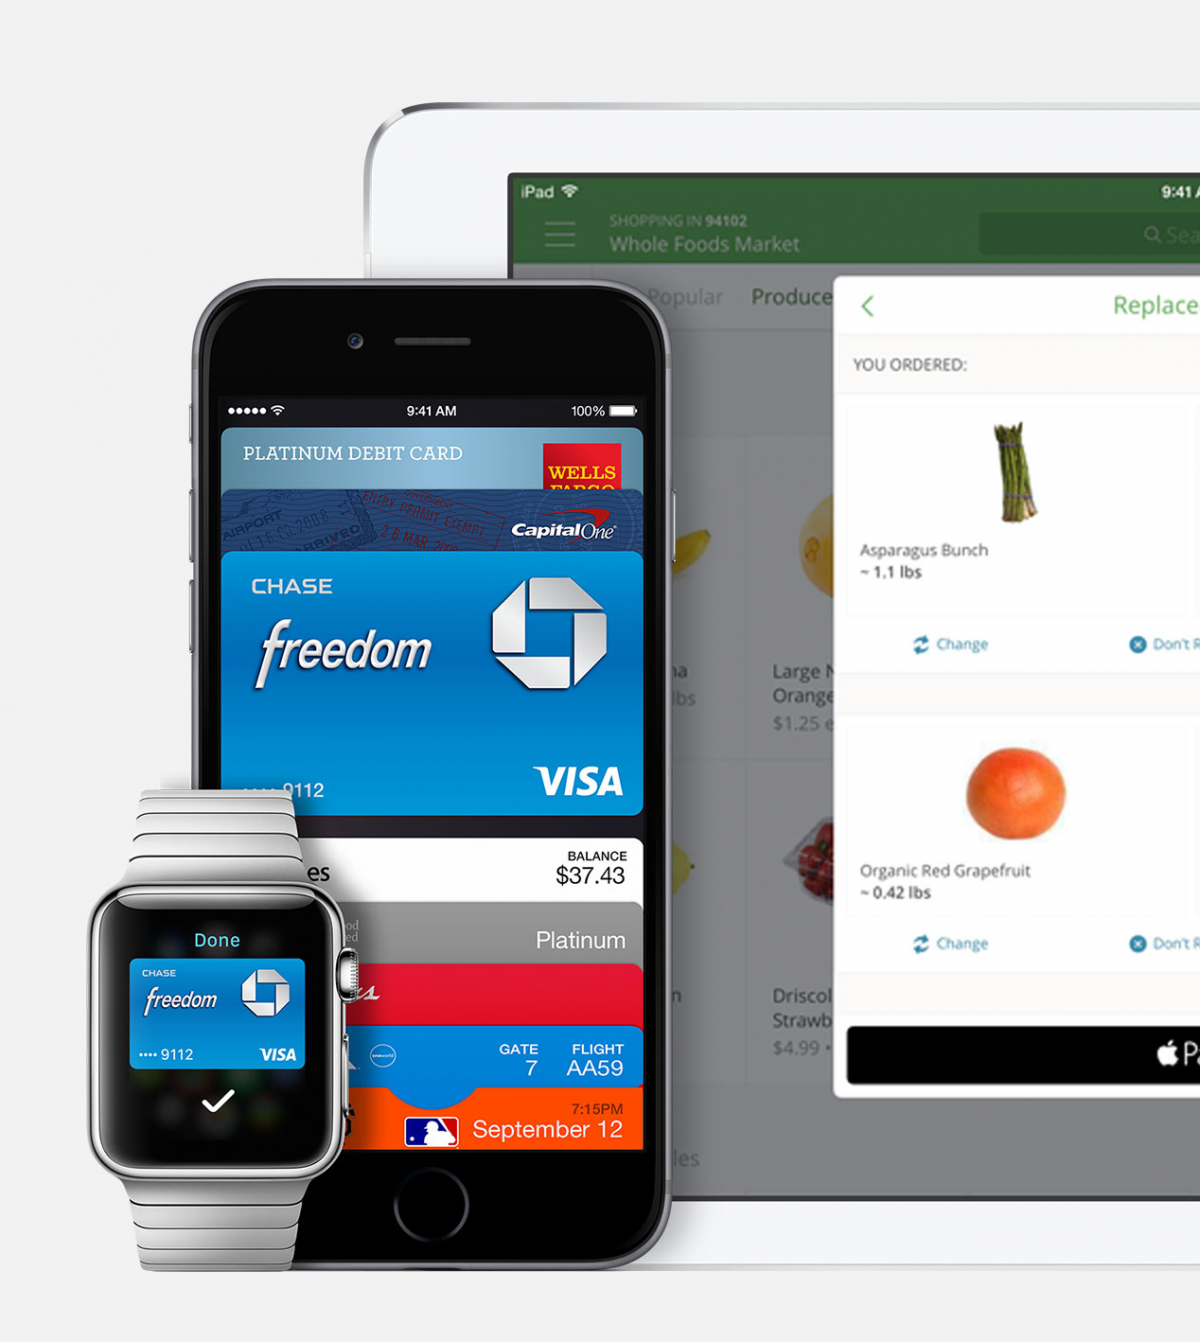 NFC, Apple Pay, CurrentC, and Smartphone Competition